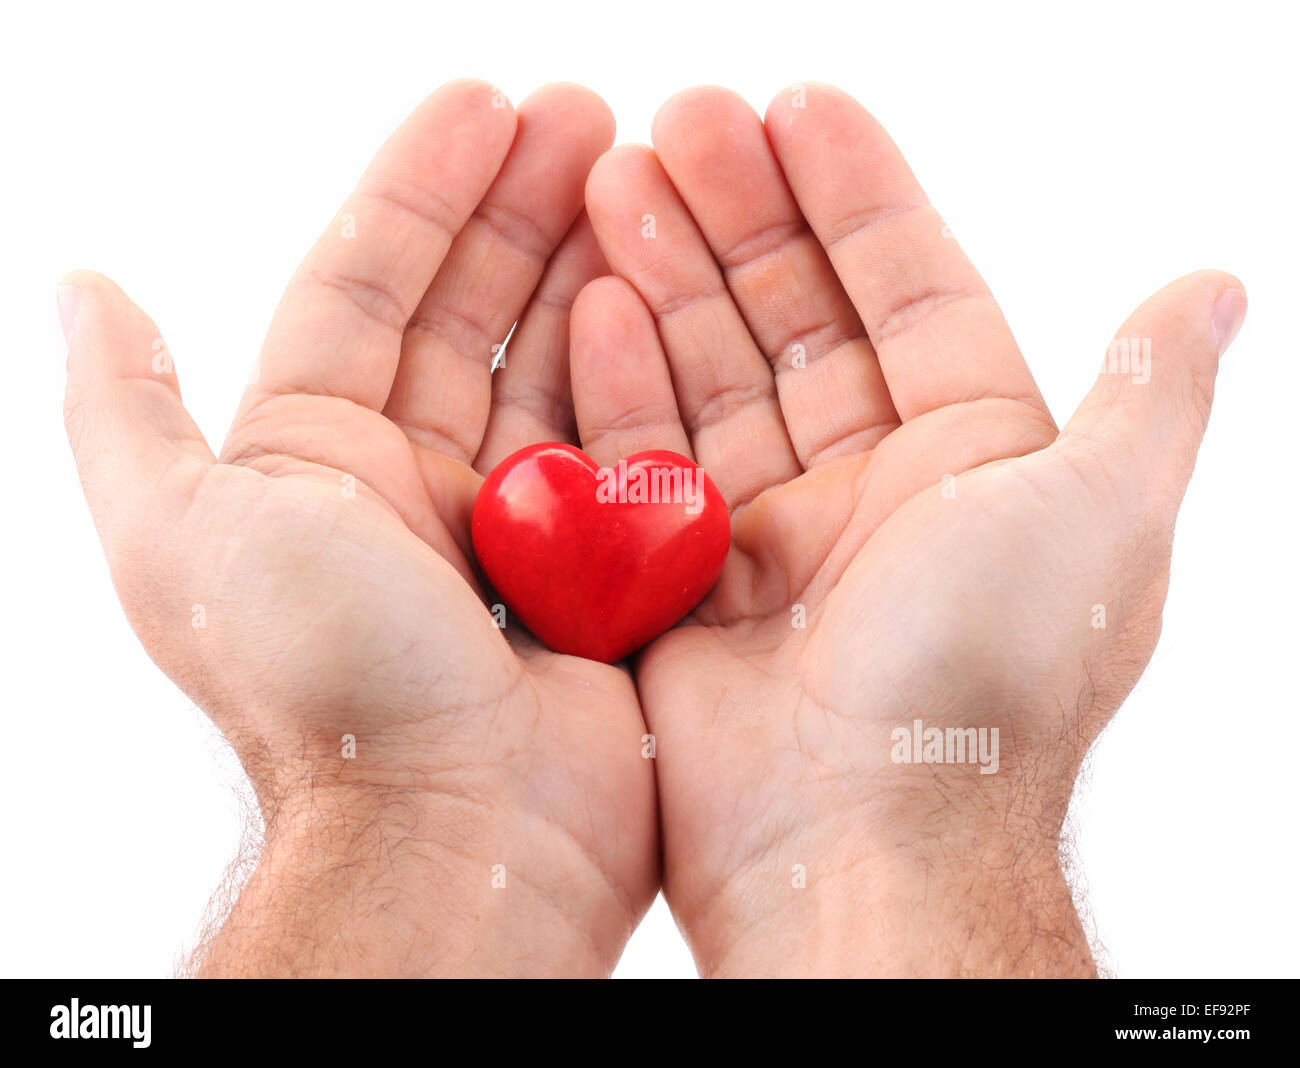 Red heart in male hands on a white background. Stock Photo